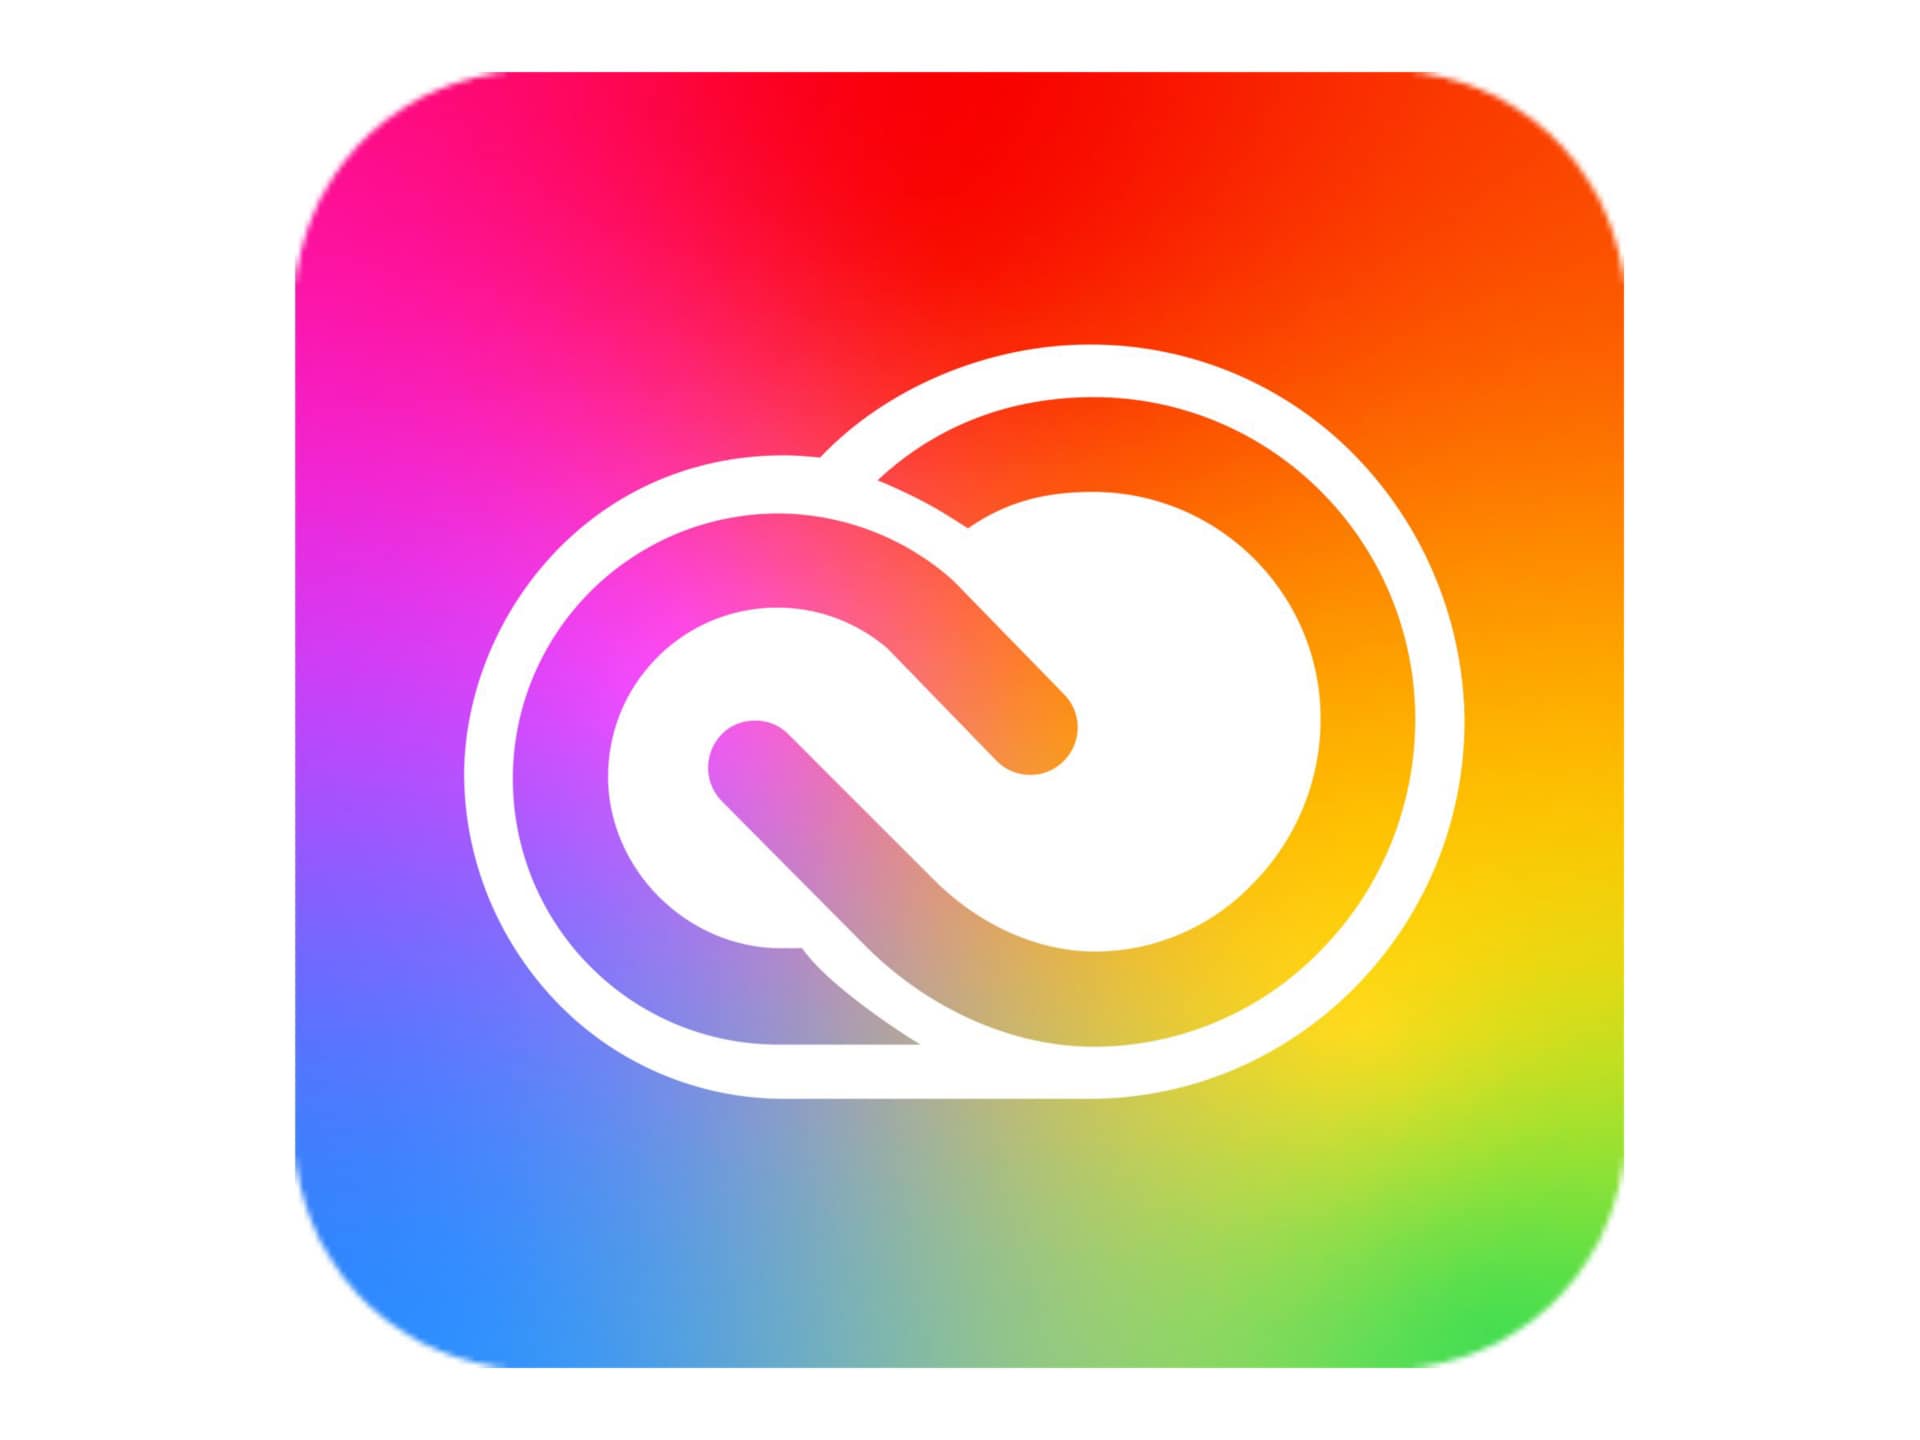 Adobe Creative Cloud for teams - Subscription New (4 months) - 1 named user